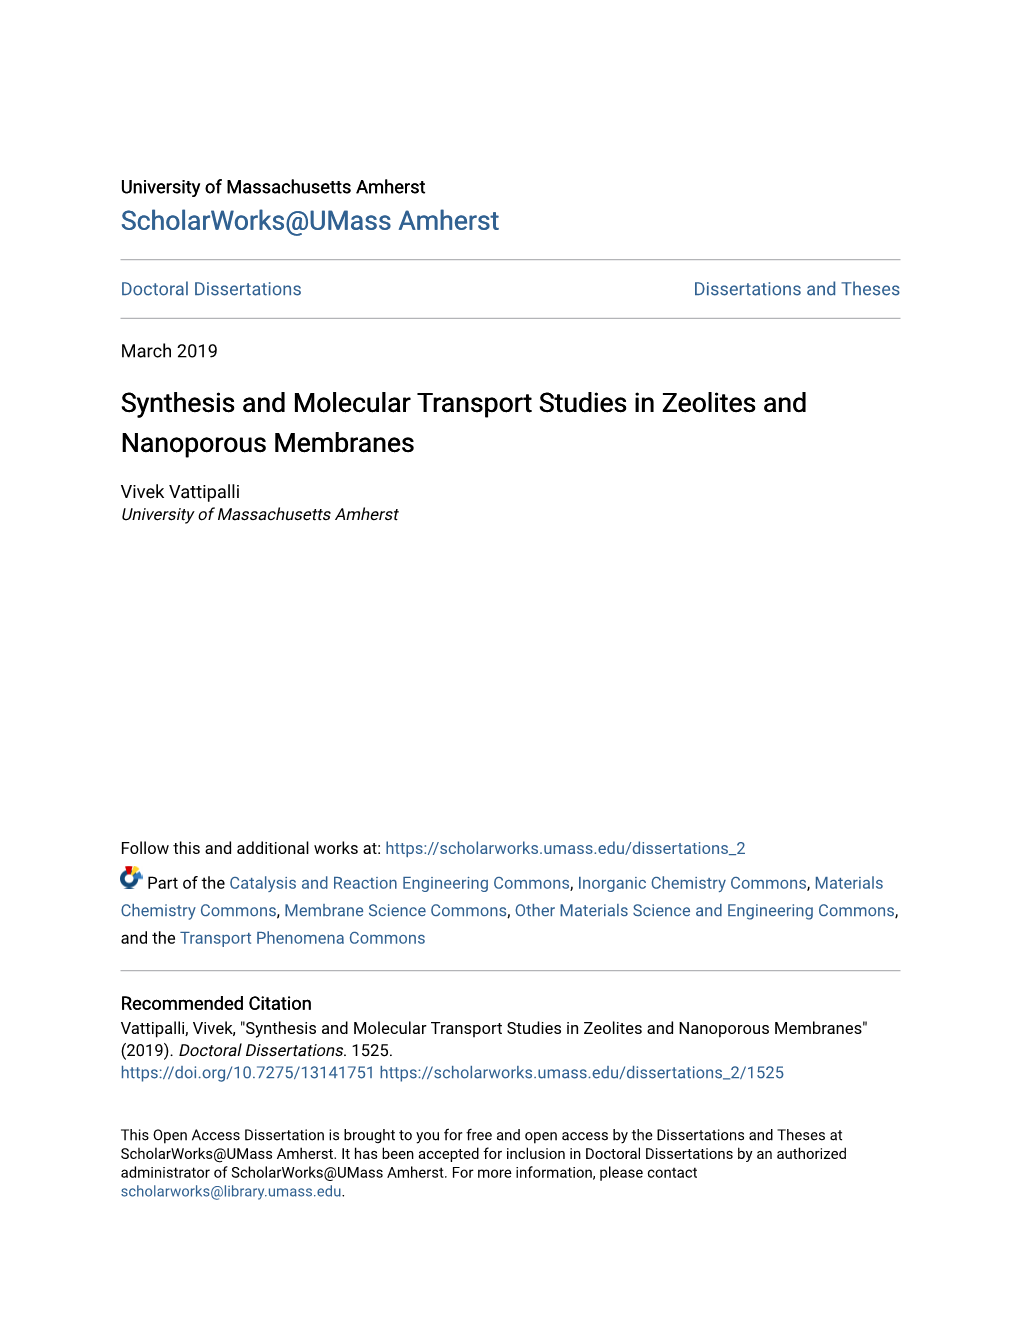 Synthesis and Molecular Transport Studies in Zeolites and Nanoporous Membranes